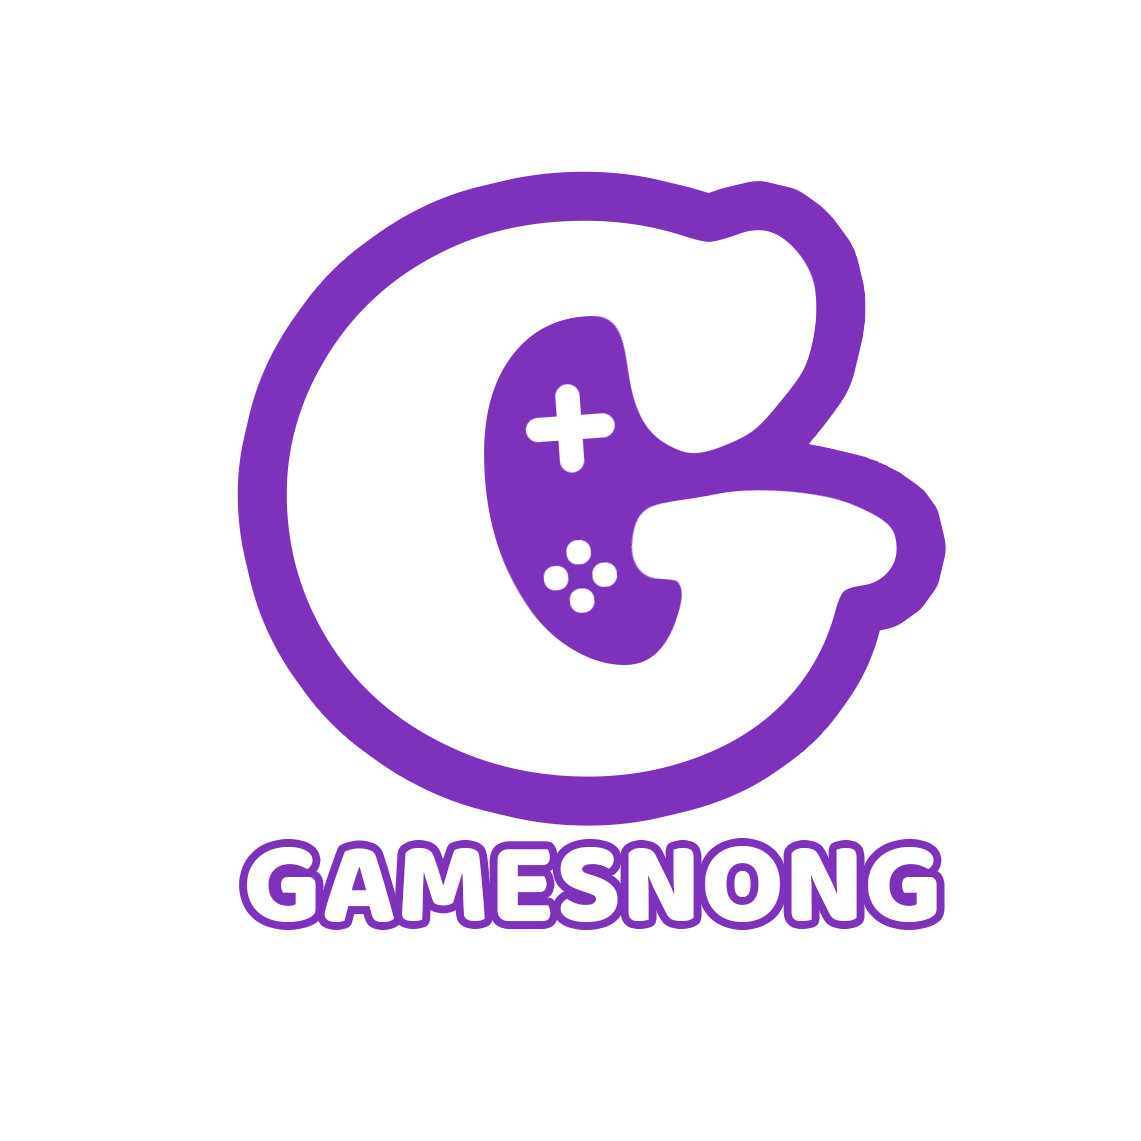 Gamesnong - Free Games To Download, Latest version and Full version, Repack PC Game, Best PC Games, Direct Links Games Download Fast and Safe.